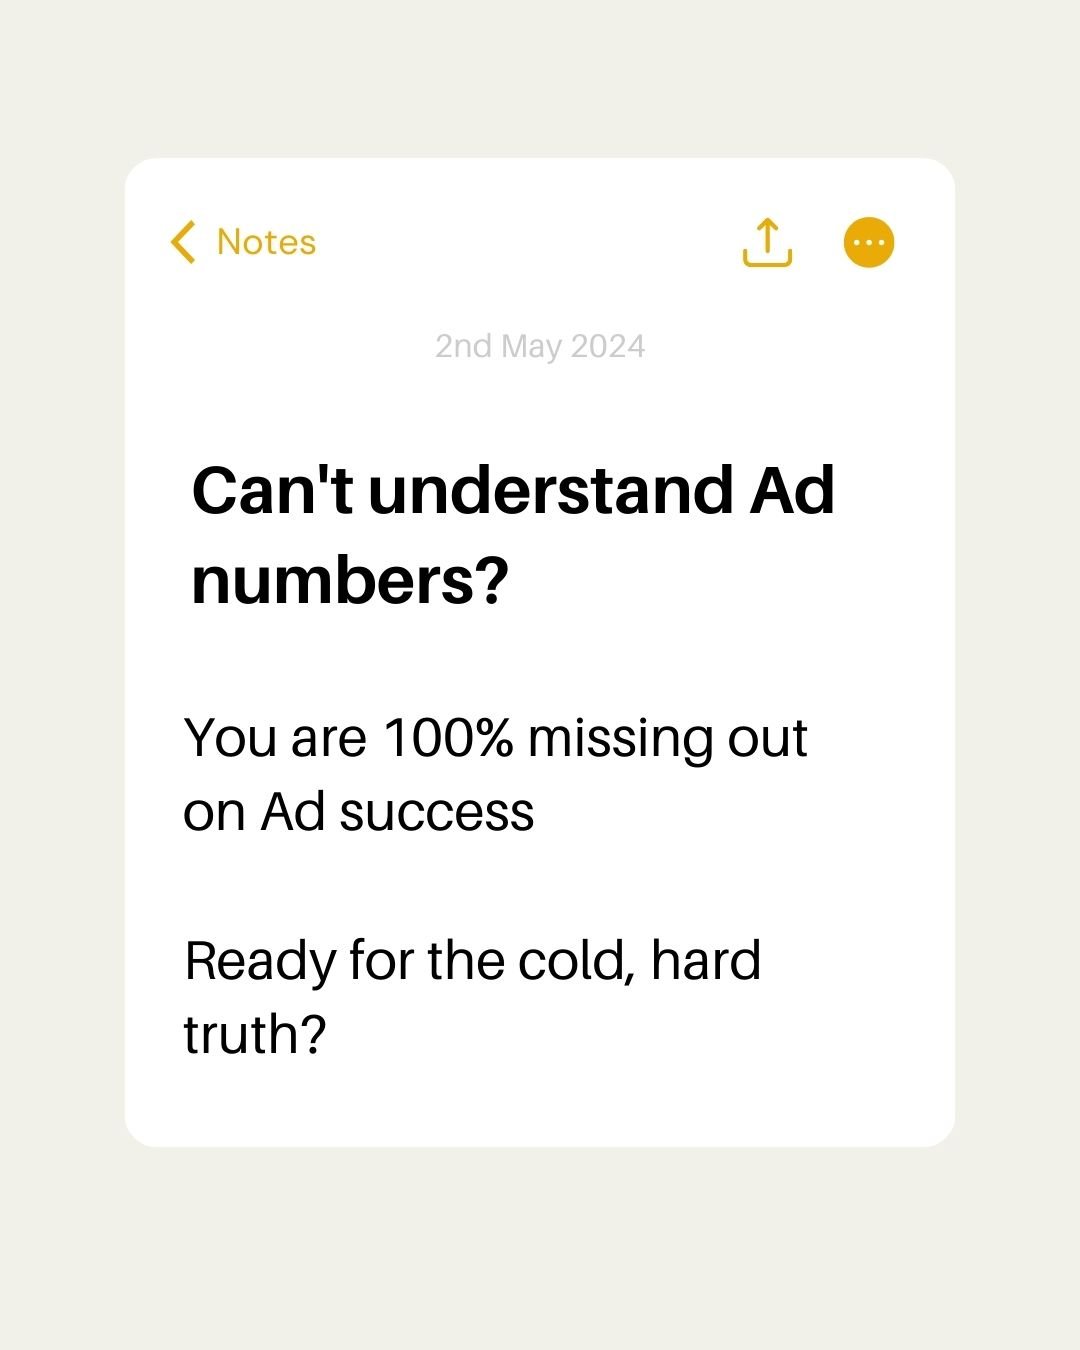 I get it - numbers might not be your thing. 

But if you're shelling out cash for ads, you absolutely need to understand those ad and funnel metrics. 

Ignoring them is a one-way ticket to wasted ad spend and missed opportunities. 

As someone who's 